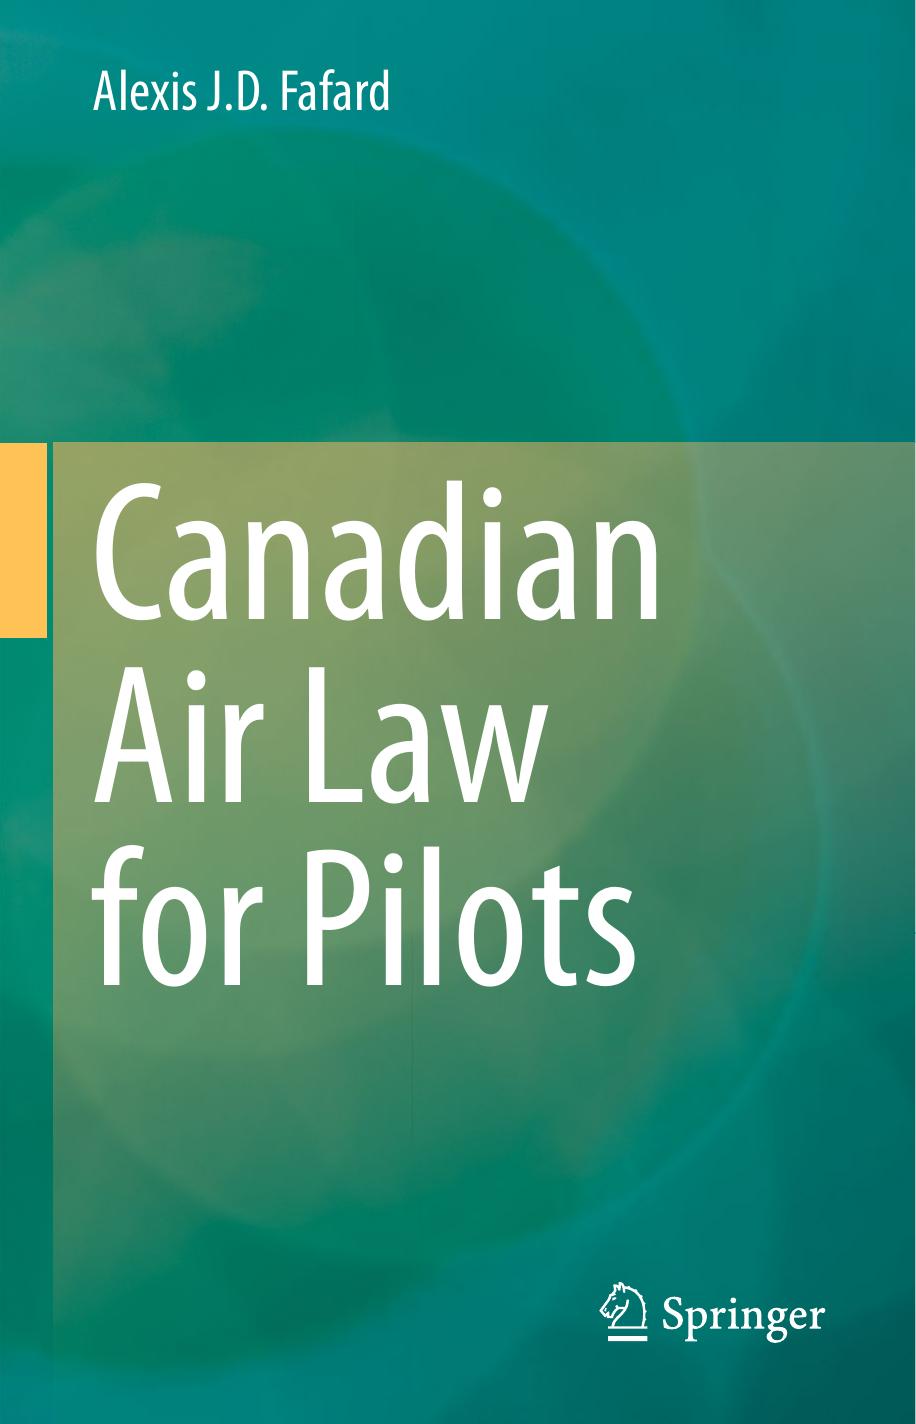 Canadian Air Law for Pilots by Alexis J.D. Fafard